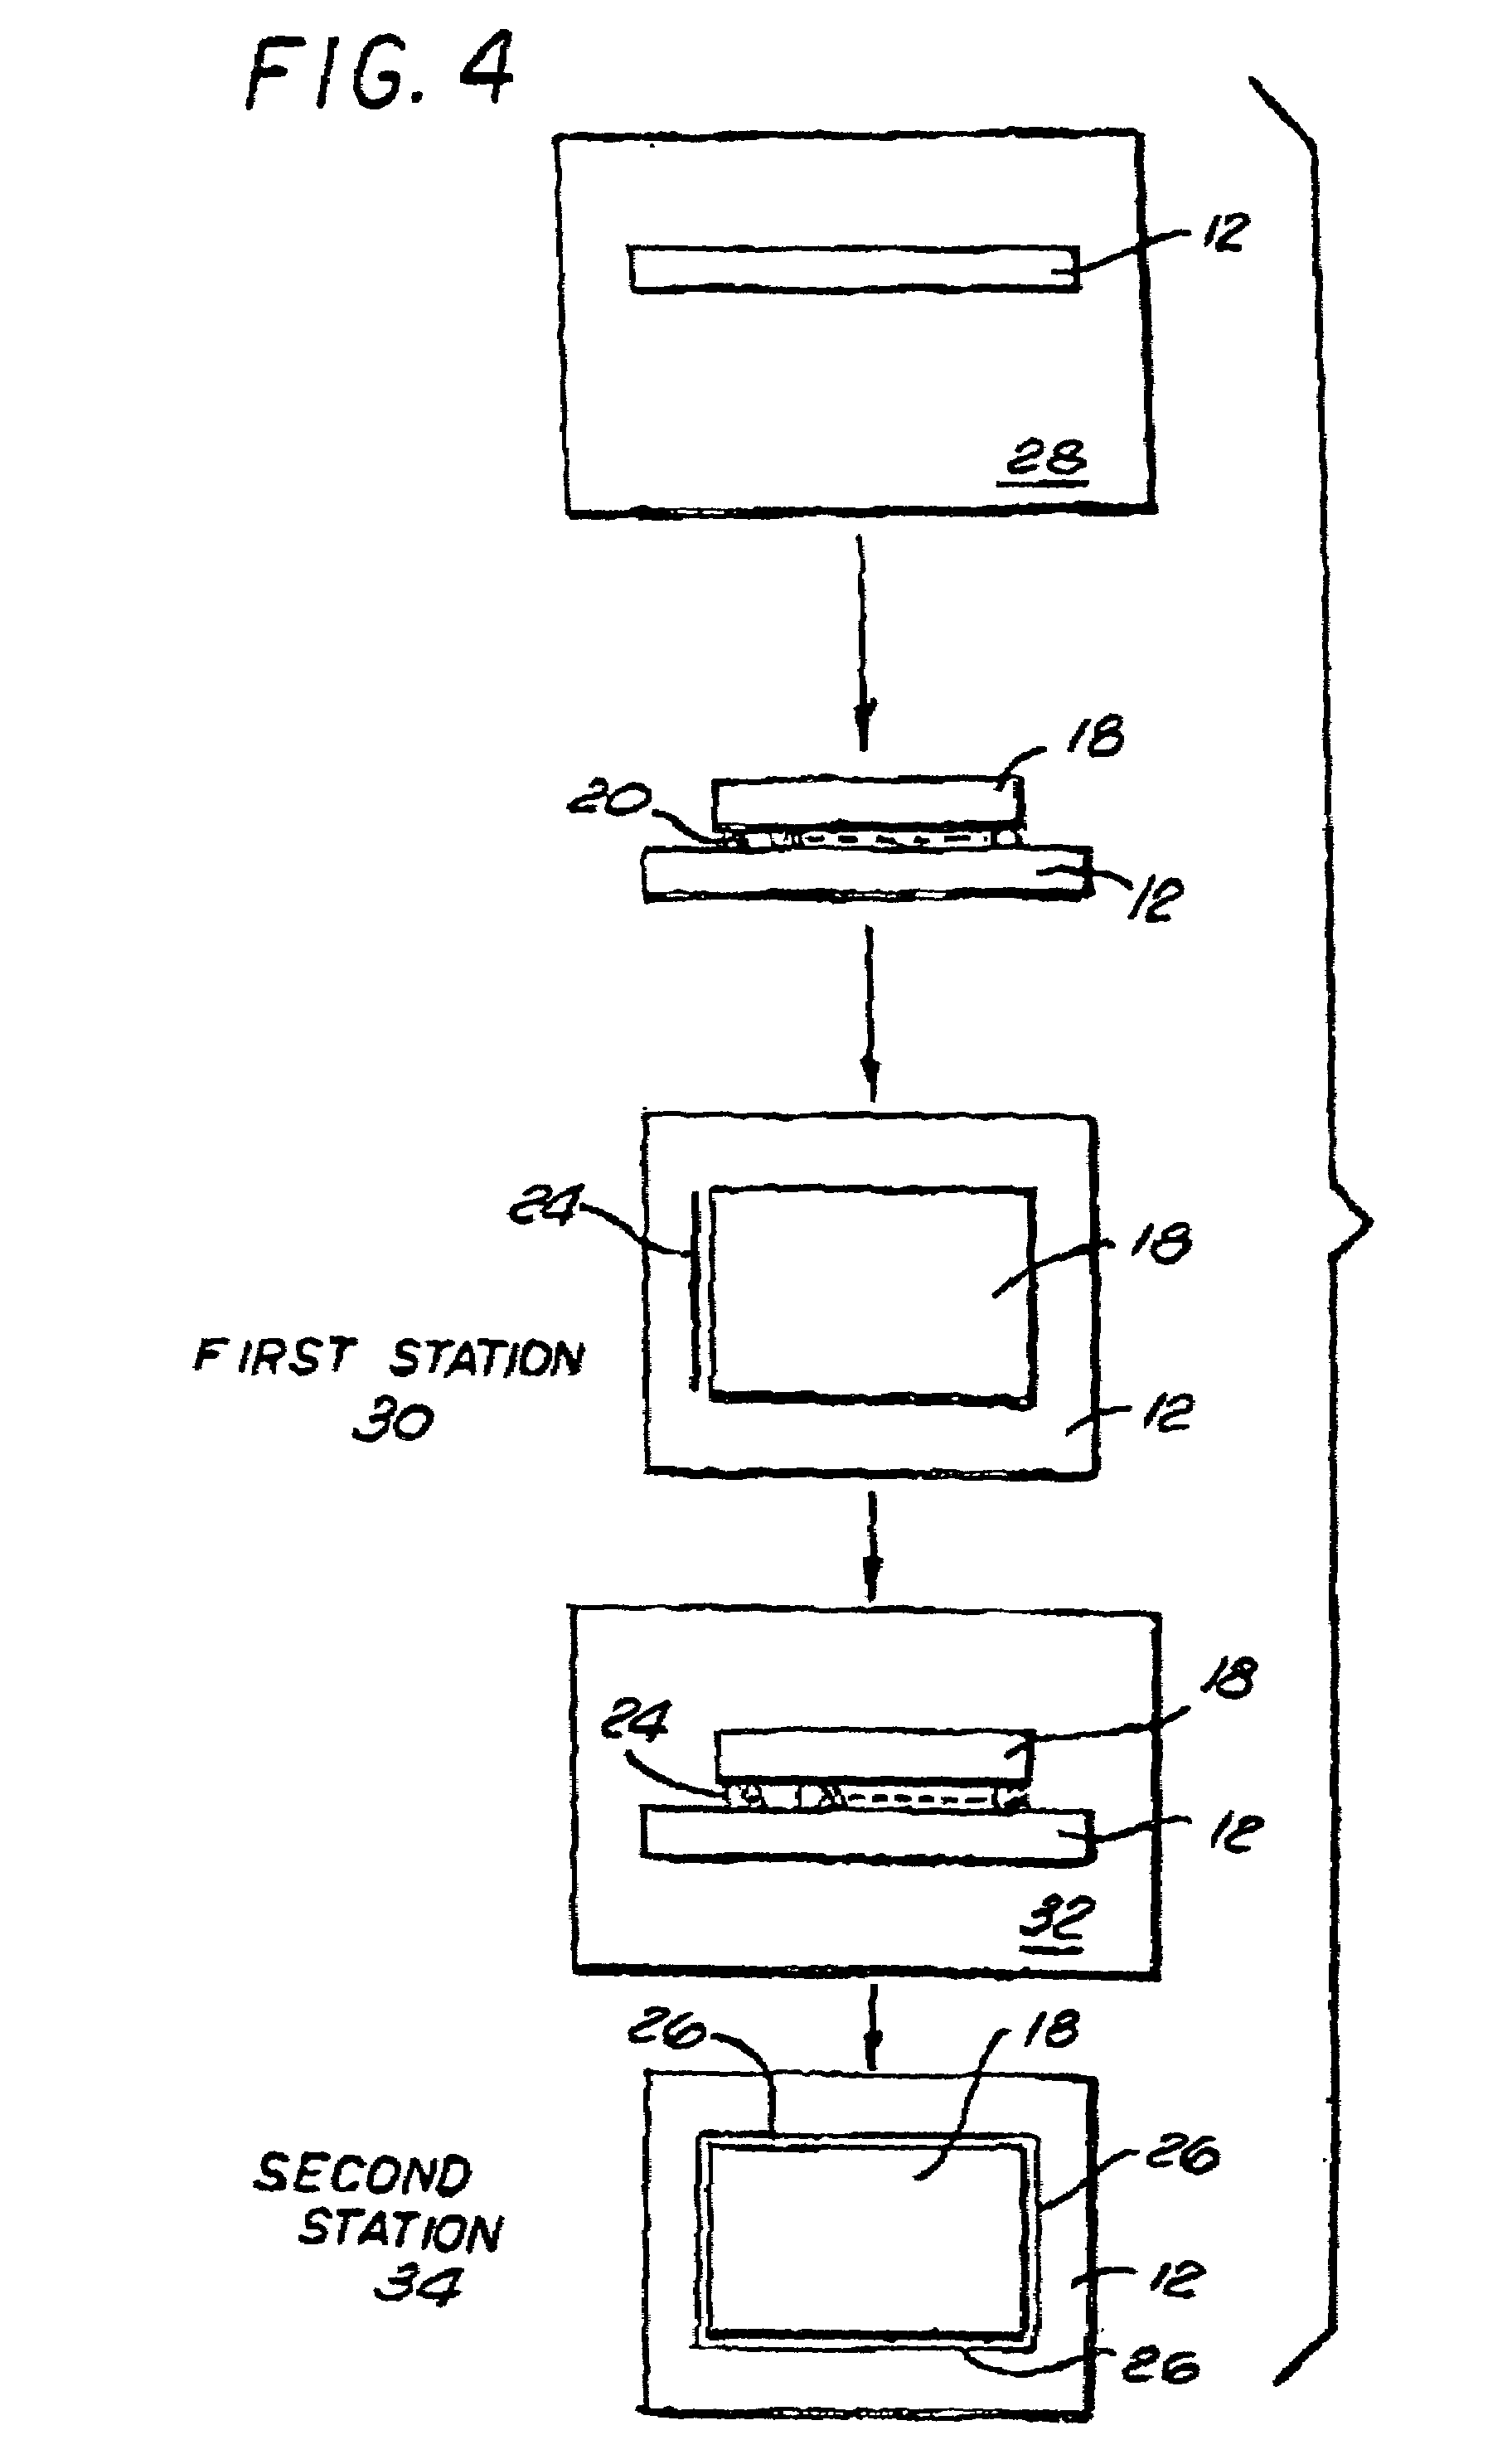 Controlled collapse chip connection (C4) integrated circuit package which has two dissimilar underfill materials